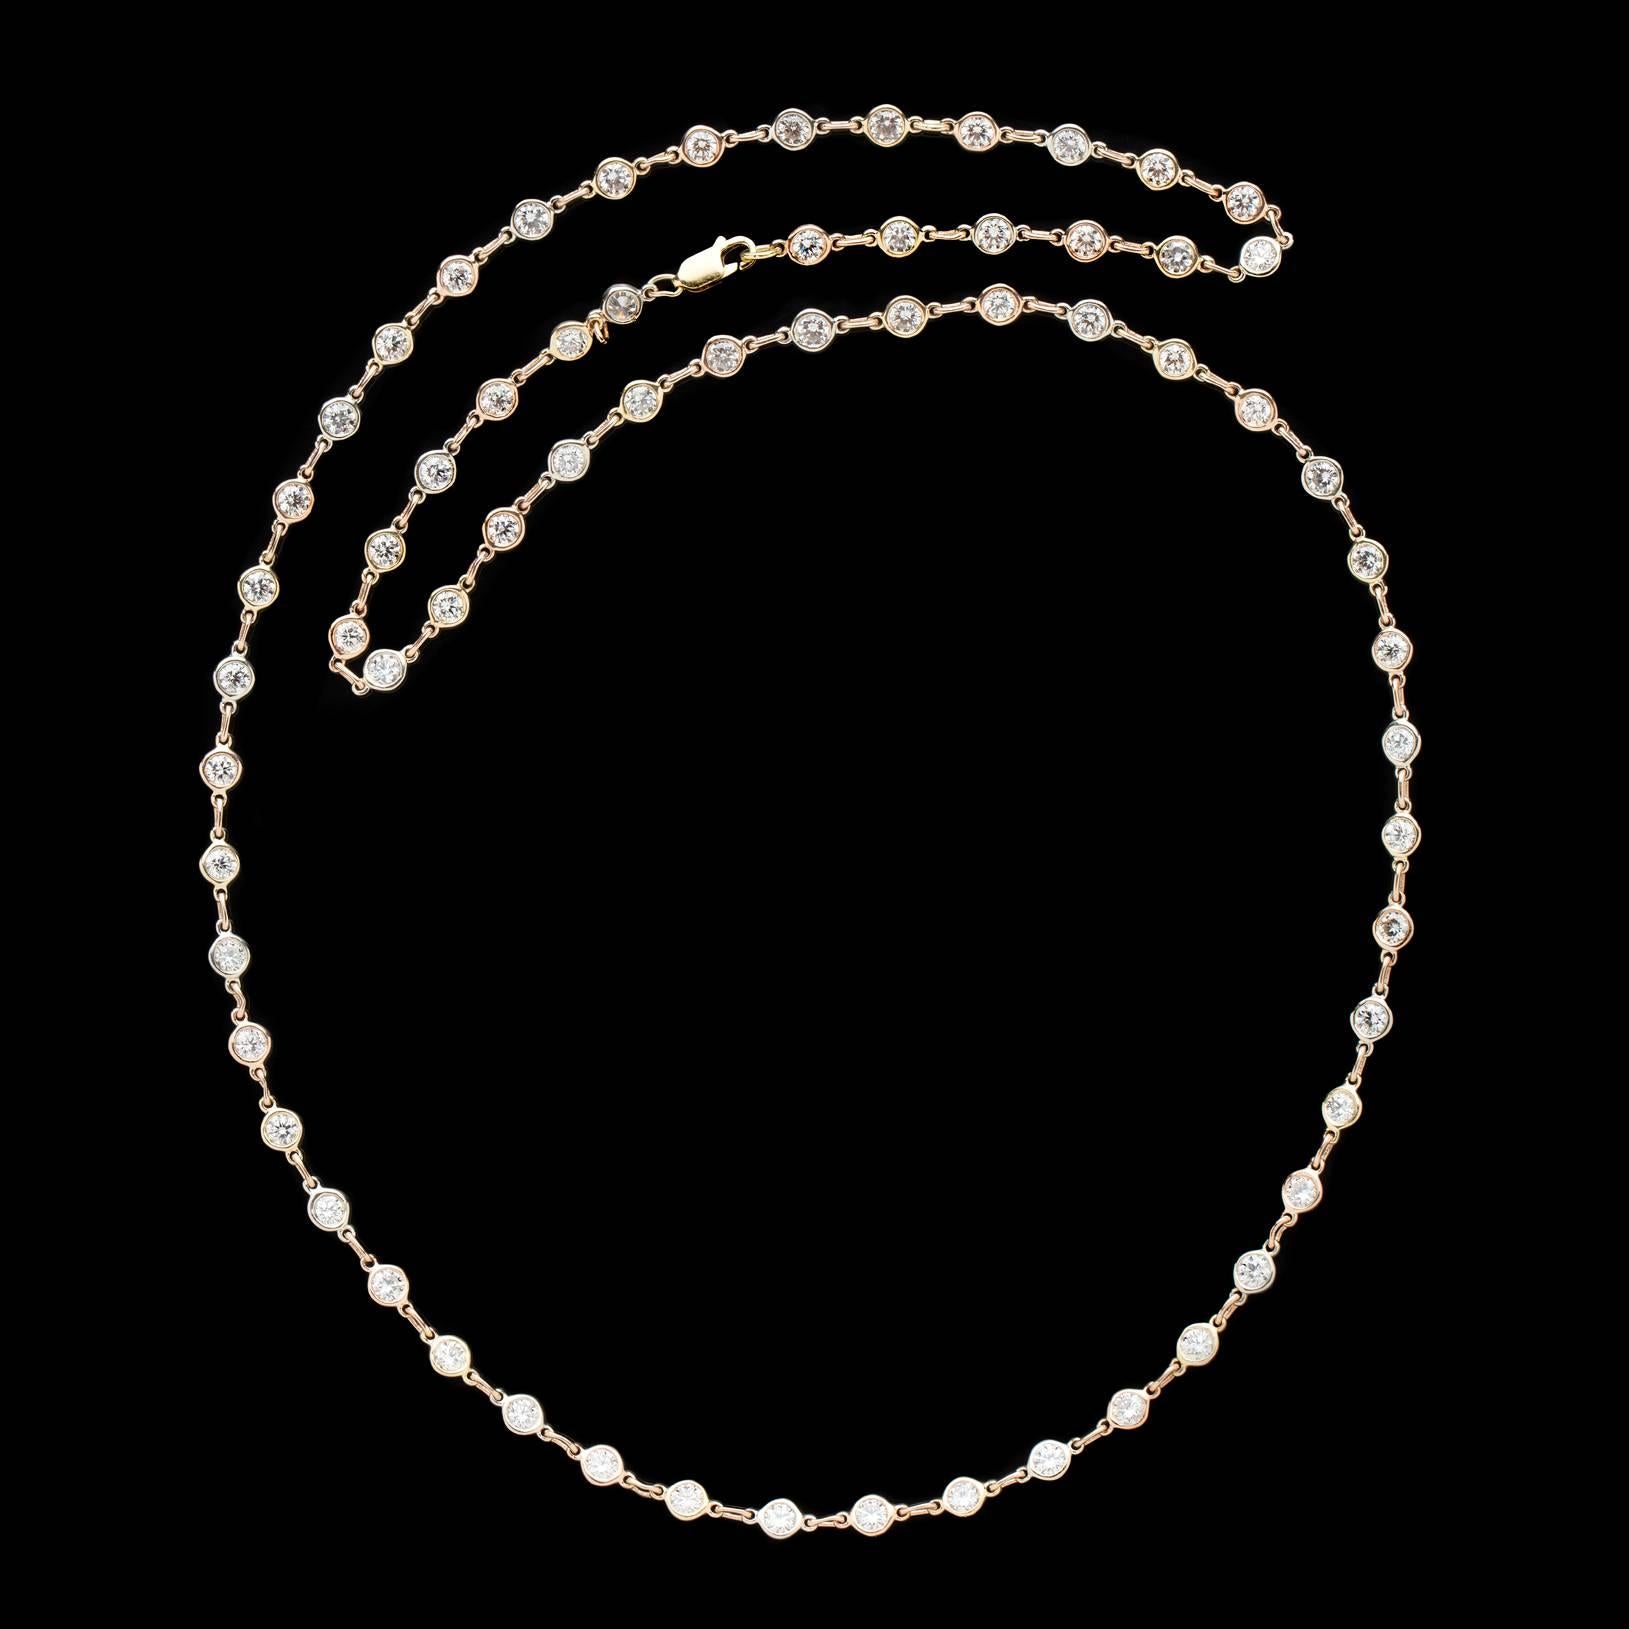 Incredible diamonds meet gorgeous craftsmanship in this exquisite Diamond Line Necklace. Featuring 66 fine diamonds averaging G/VS for almost 20 carats delicately bezel set in alternating rose, yellow and white gold, this beautiful statement piece